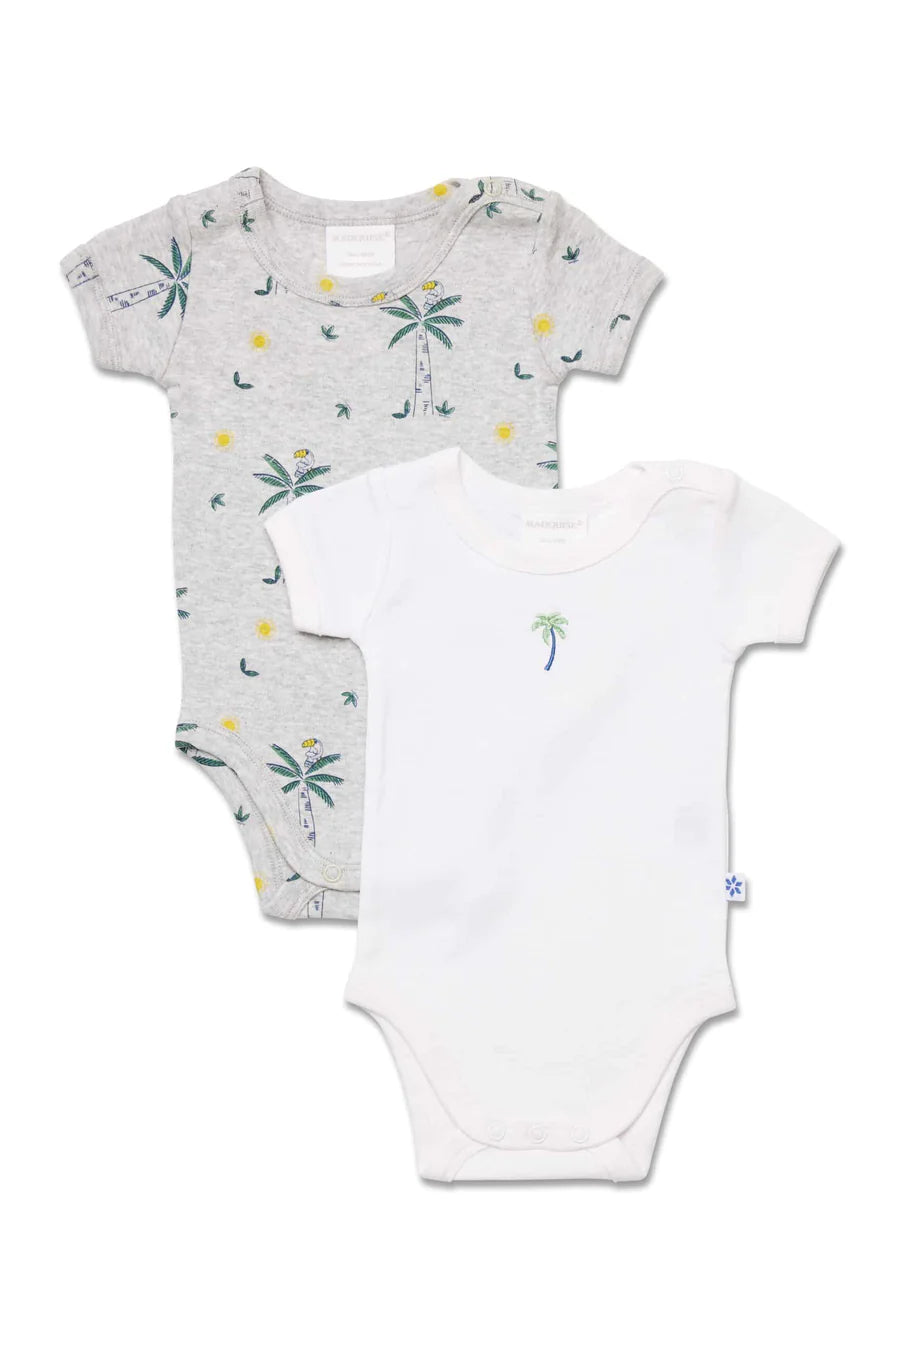 Marquise Palm Tree Bodysuit 2 Pack - White/Grey